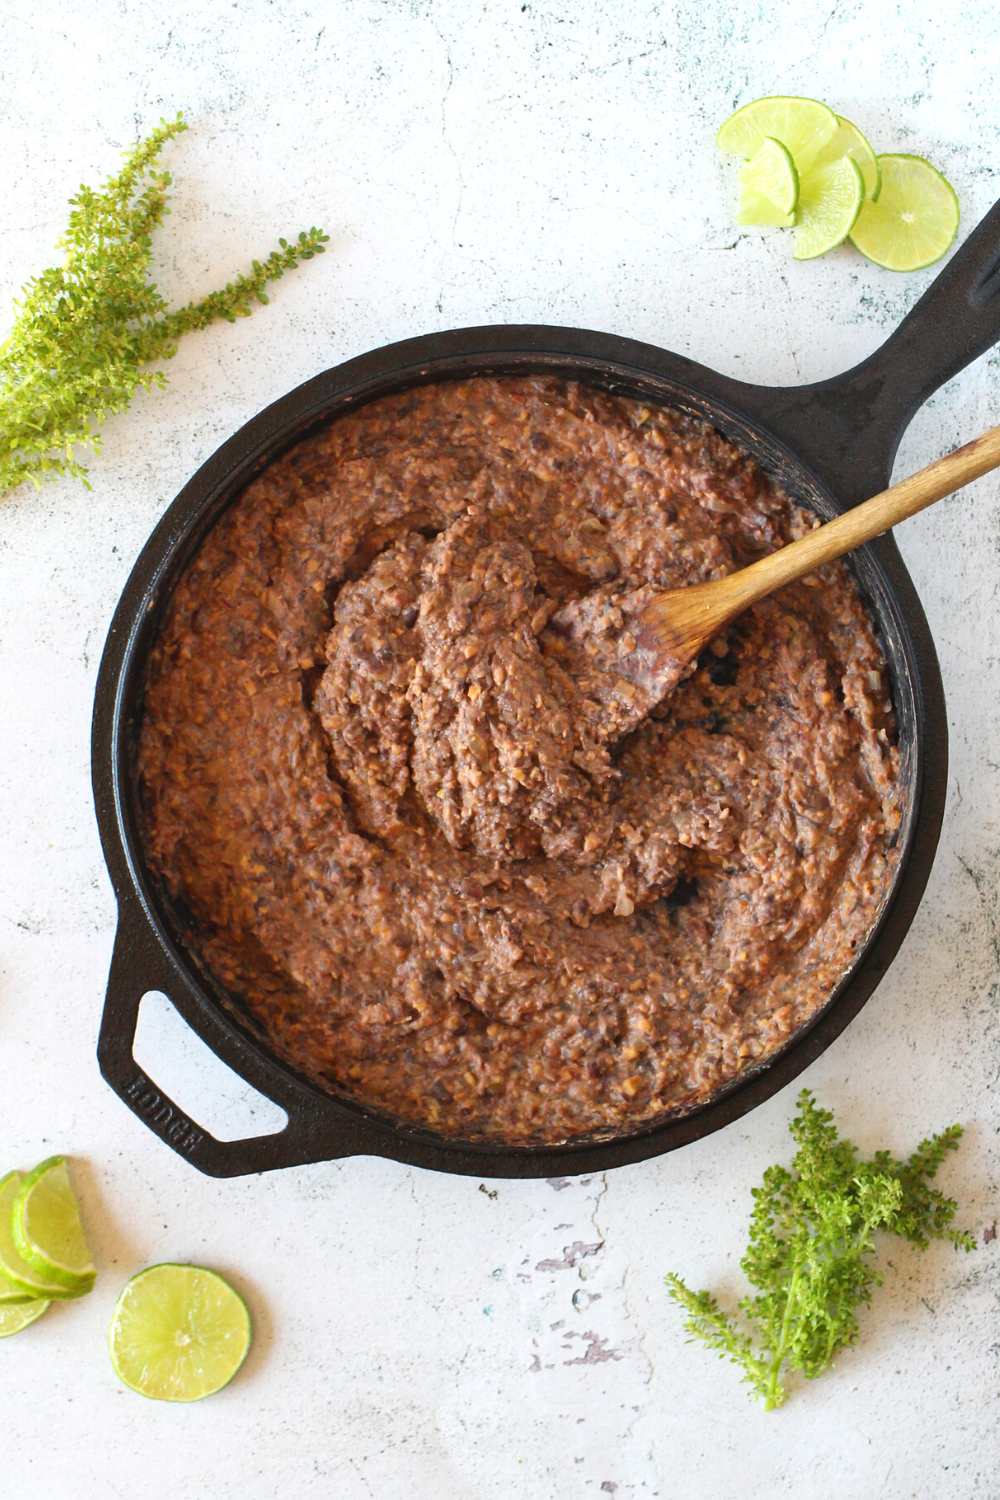 keto refried beans is an easy healthy keto recipe